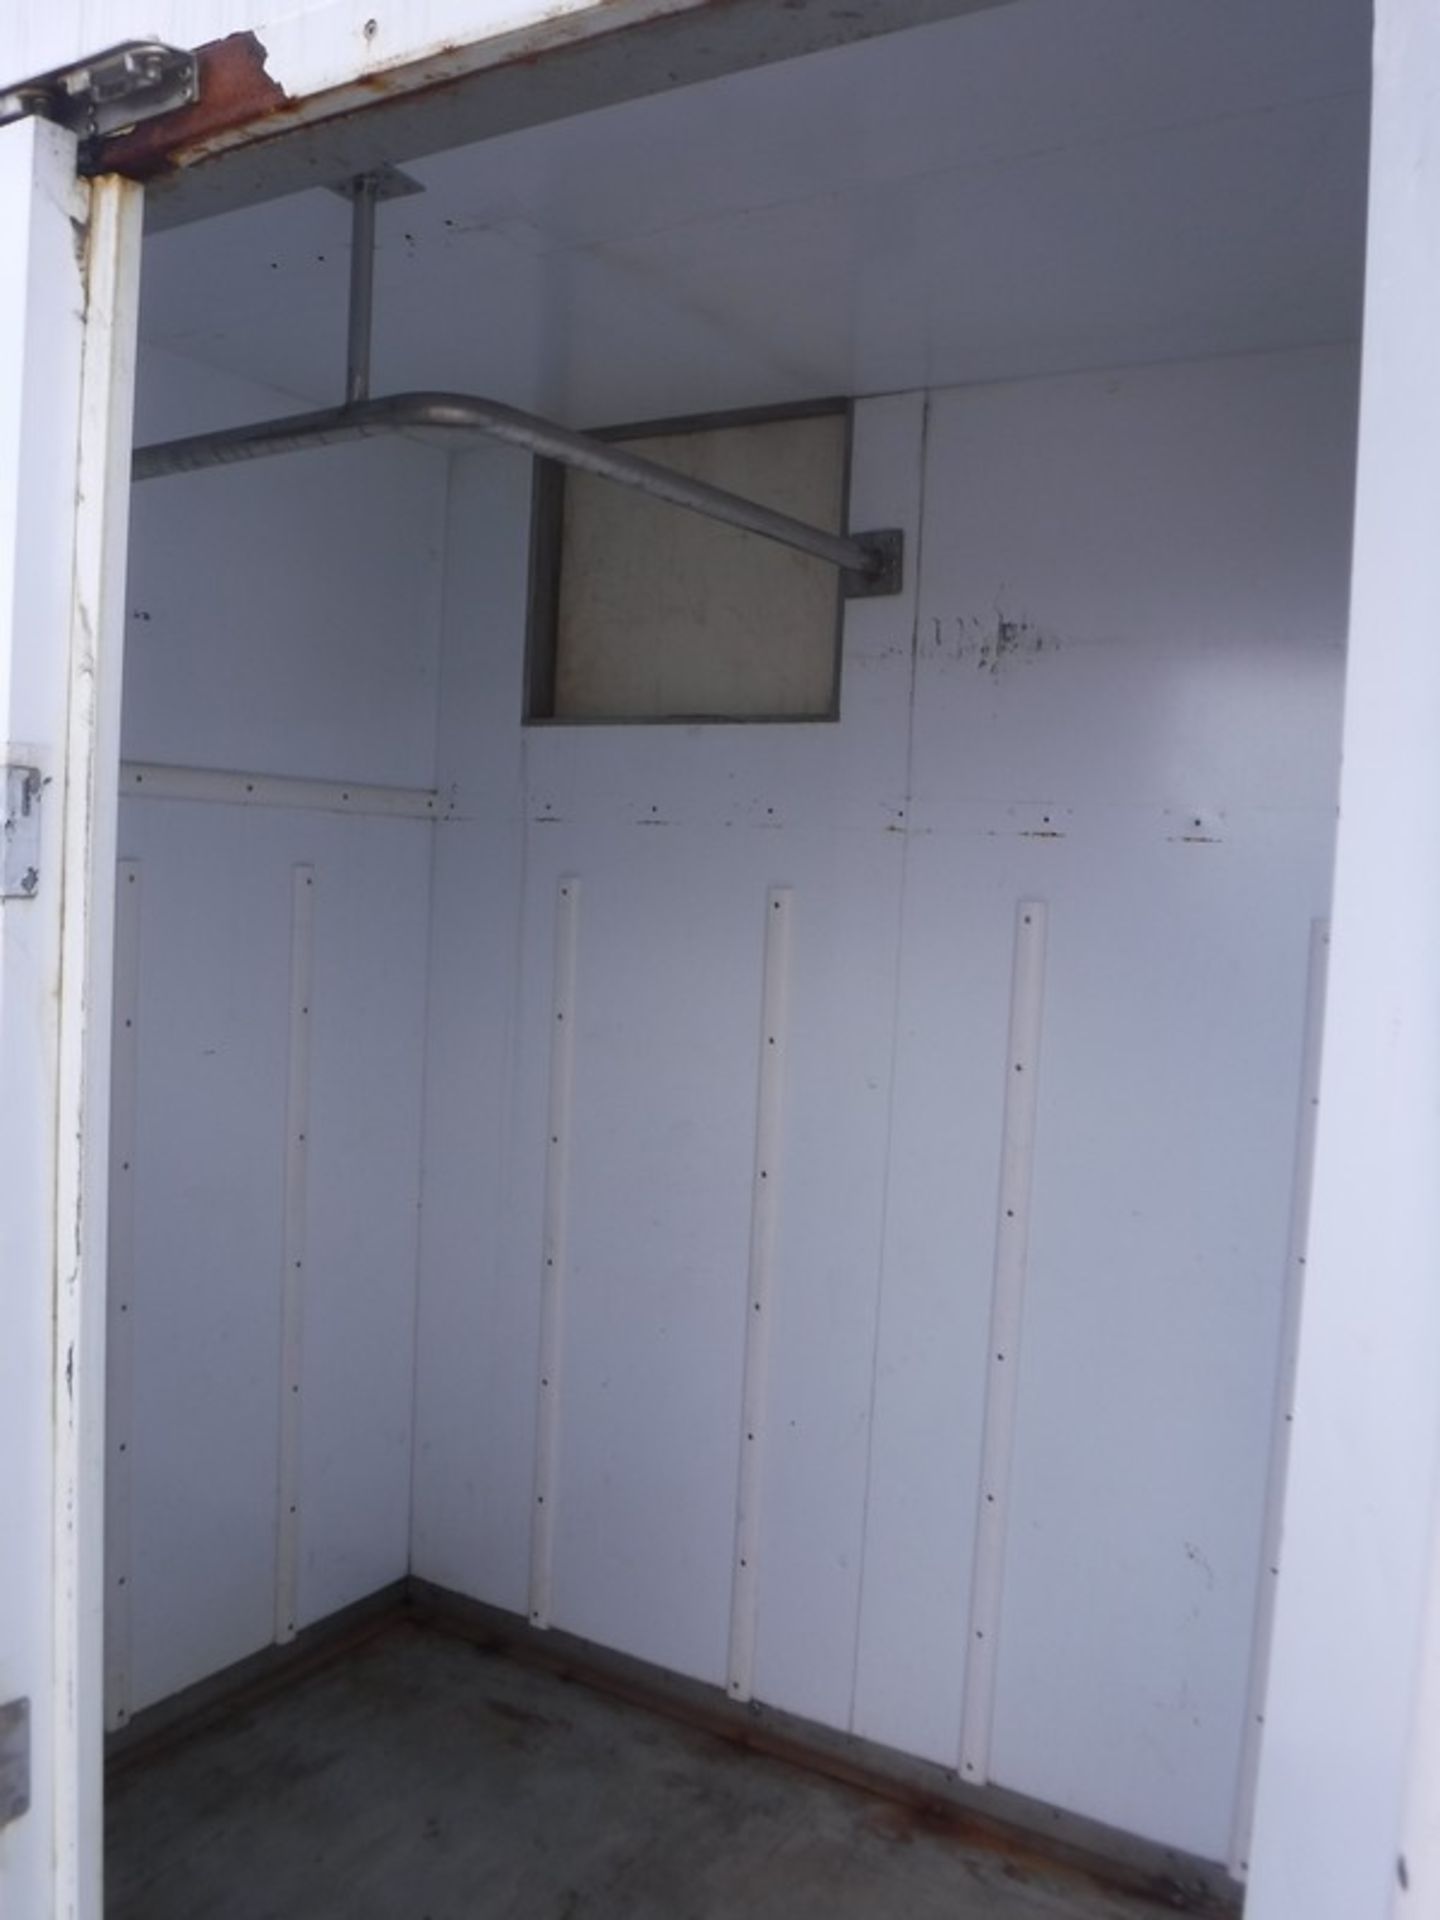 6' X 5' X 7' INSULATED CONTAINER C/W DOUBLE DOORS - Image 3 of 3